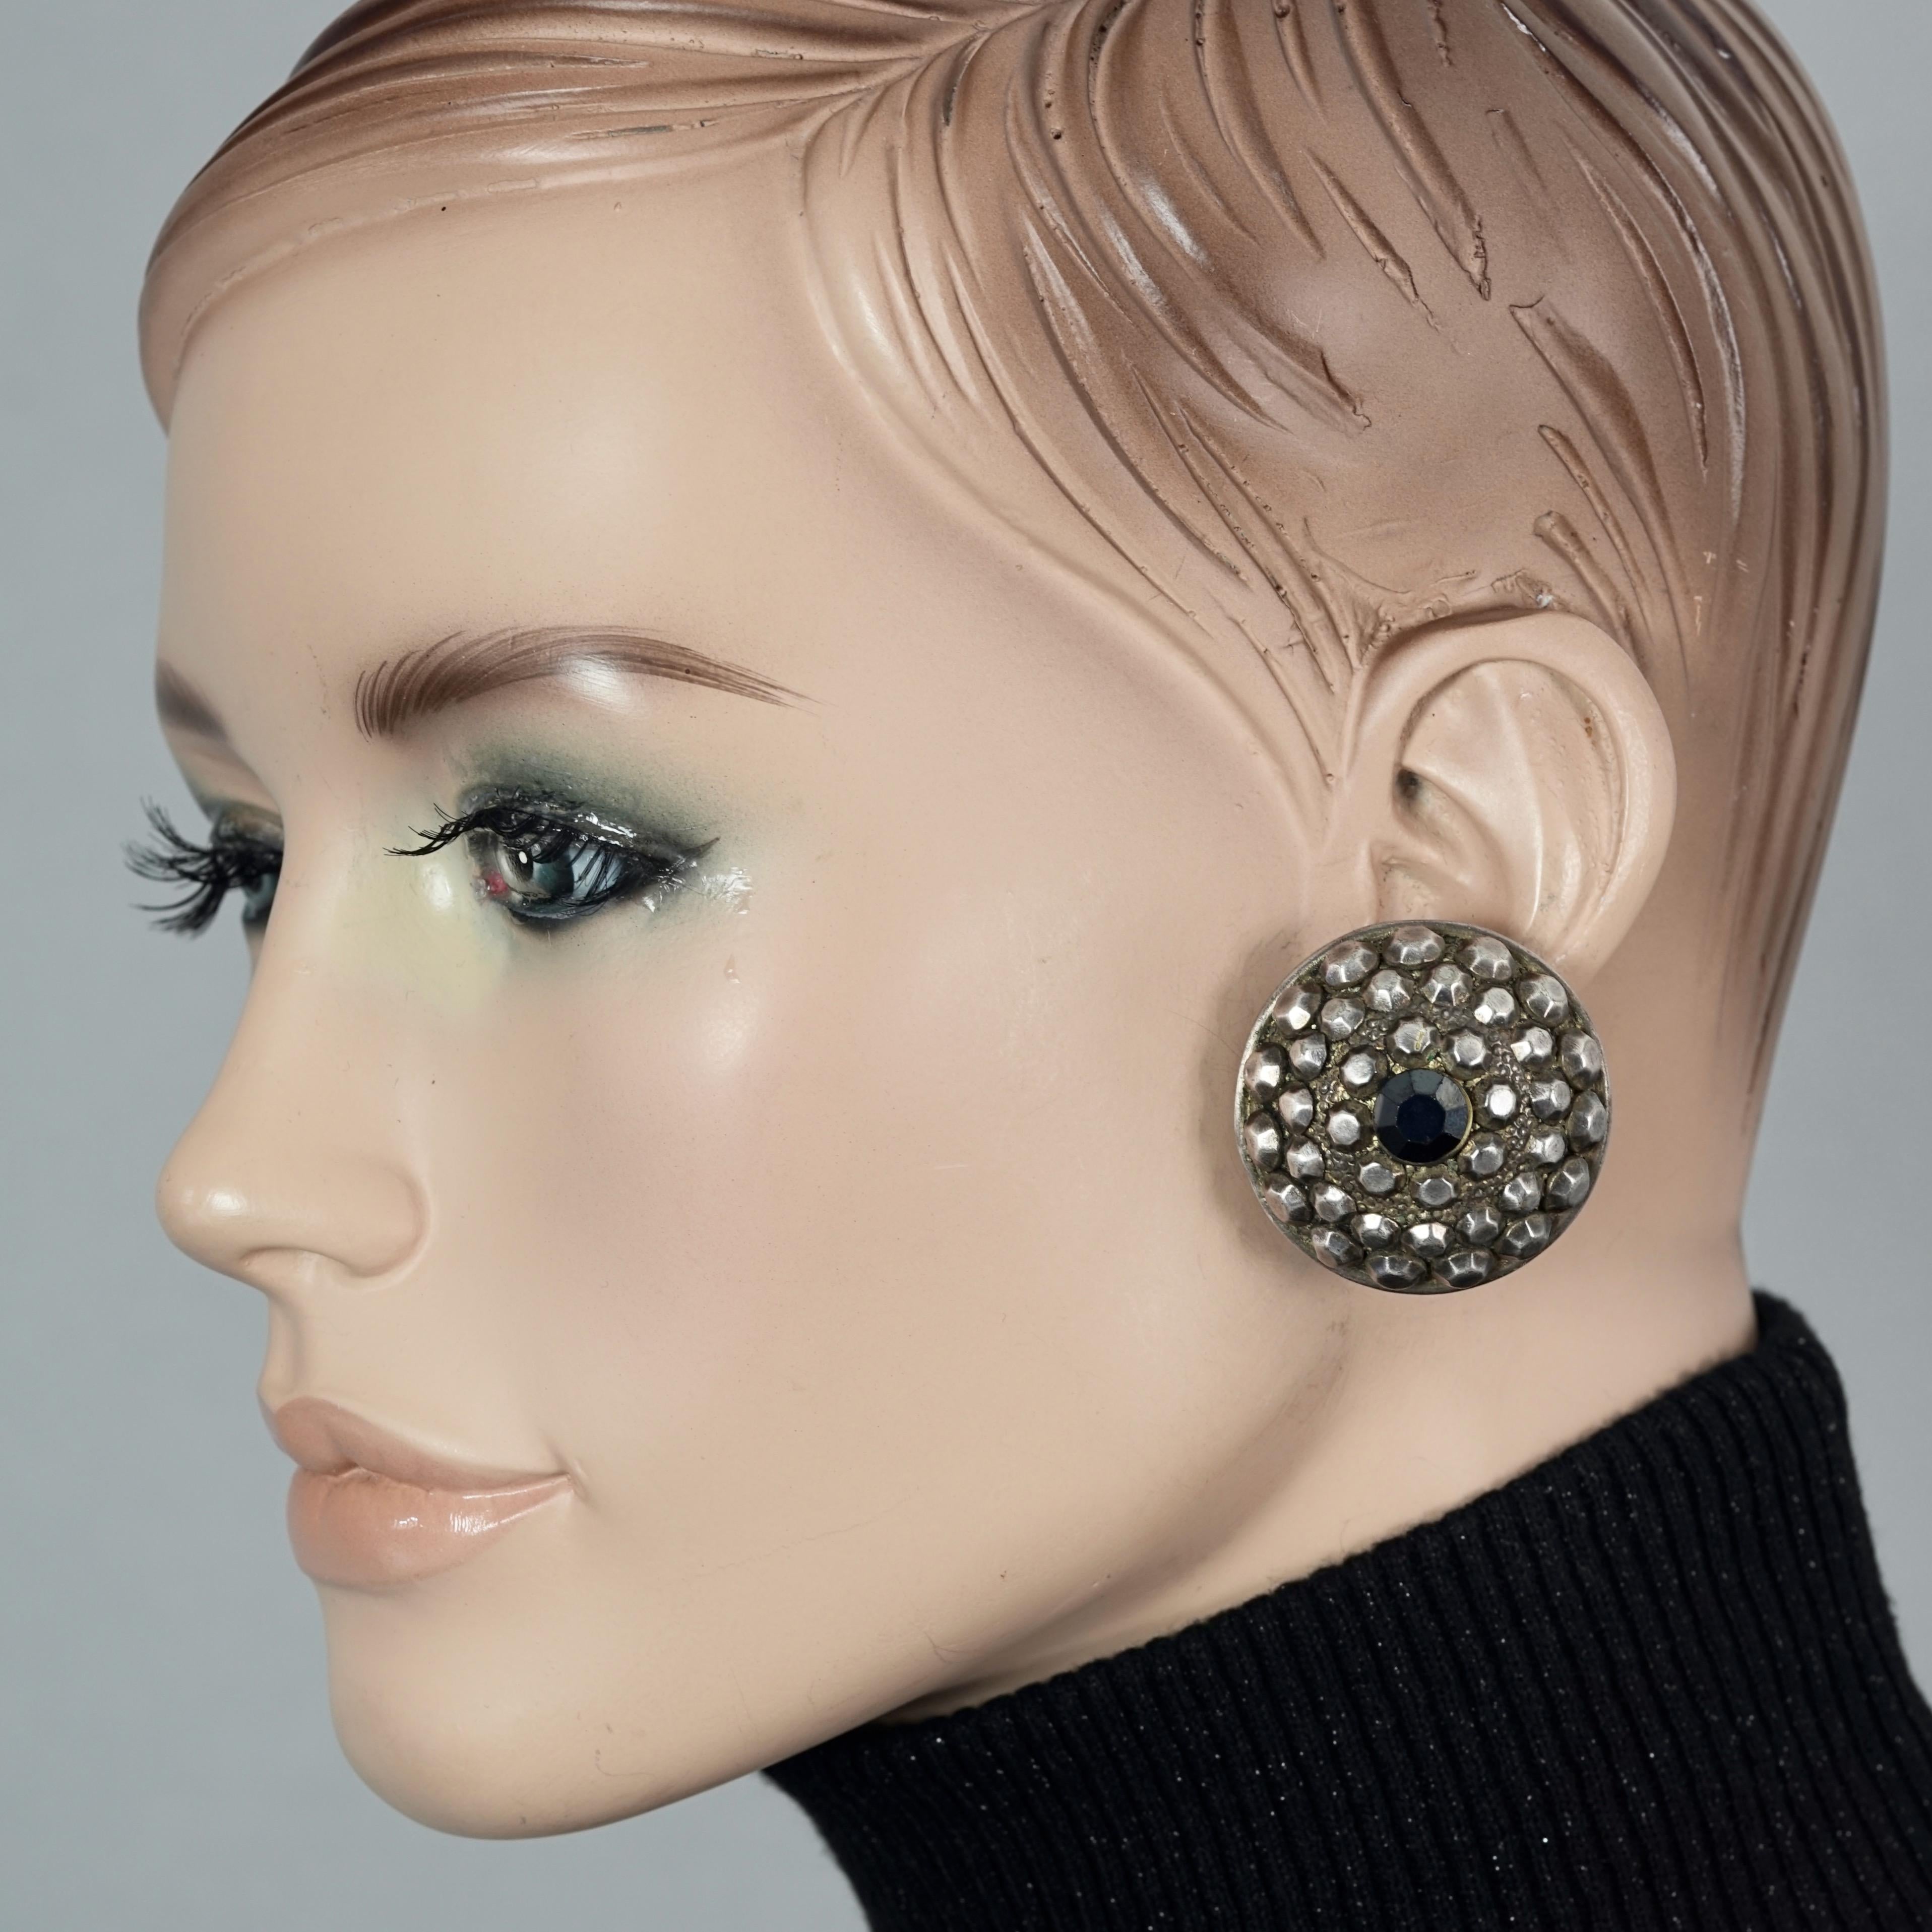 Vintage JEAN PAUL GAULTIER Ethnic Studded Disc Earrings

Measurements:
Height: 1.45 inches (3.7 cm)
Width: 1.45 inches (3.7 cm)
Depth: 0.75 inch (1.9 cm)
Weight per Earring: 16 grams

Features:
- 100% Authentic JEAN PAUL GAULTIER.
- Ethnic inspired